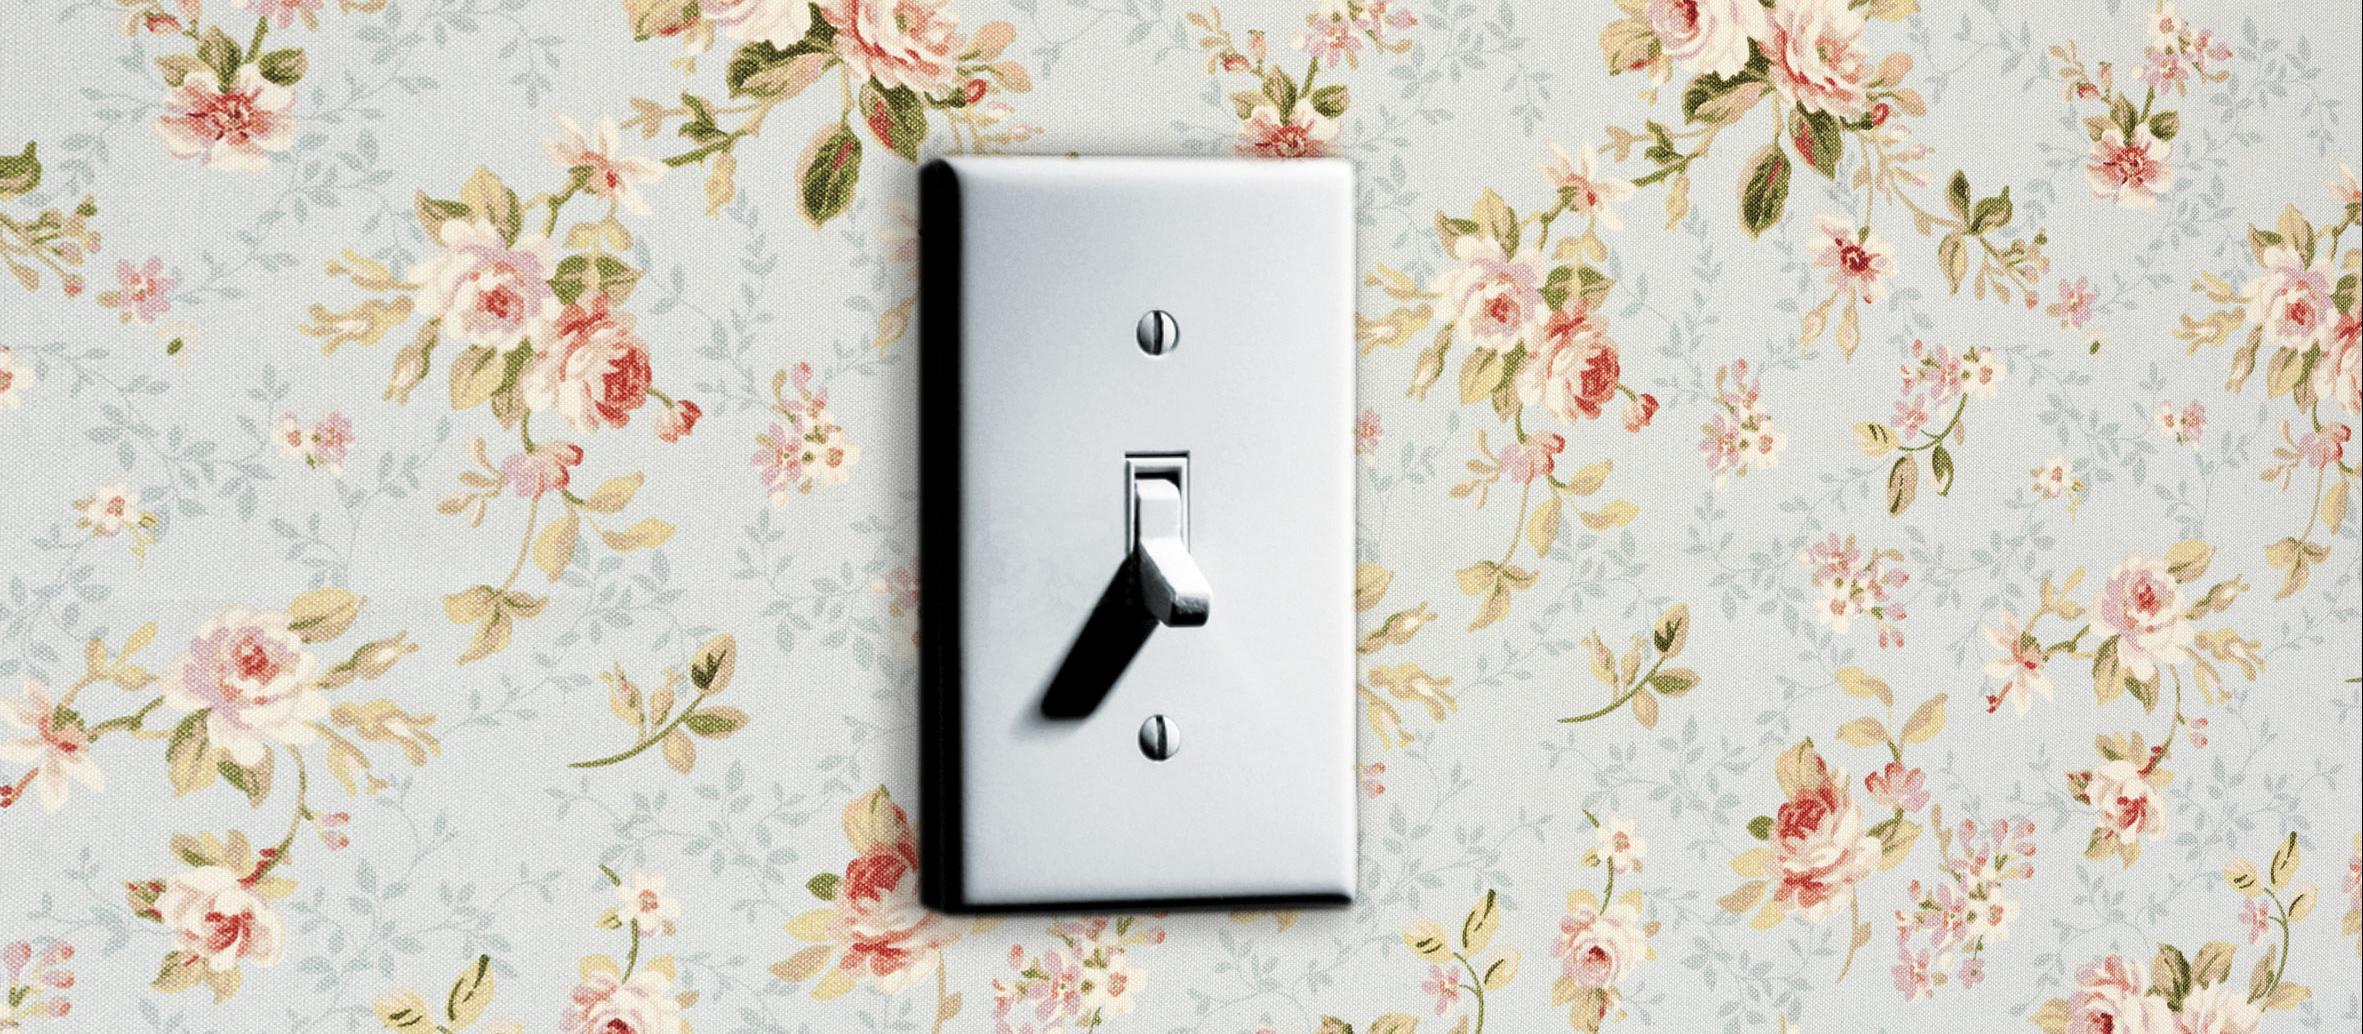 Light switch down erectile dysfunction